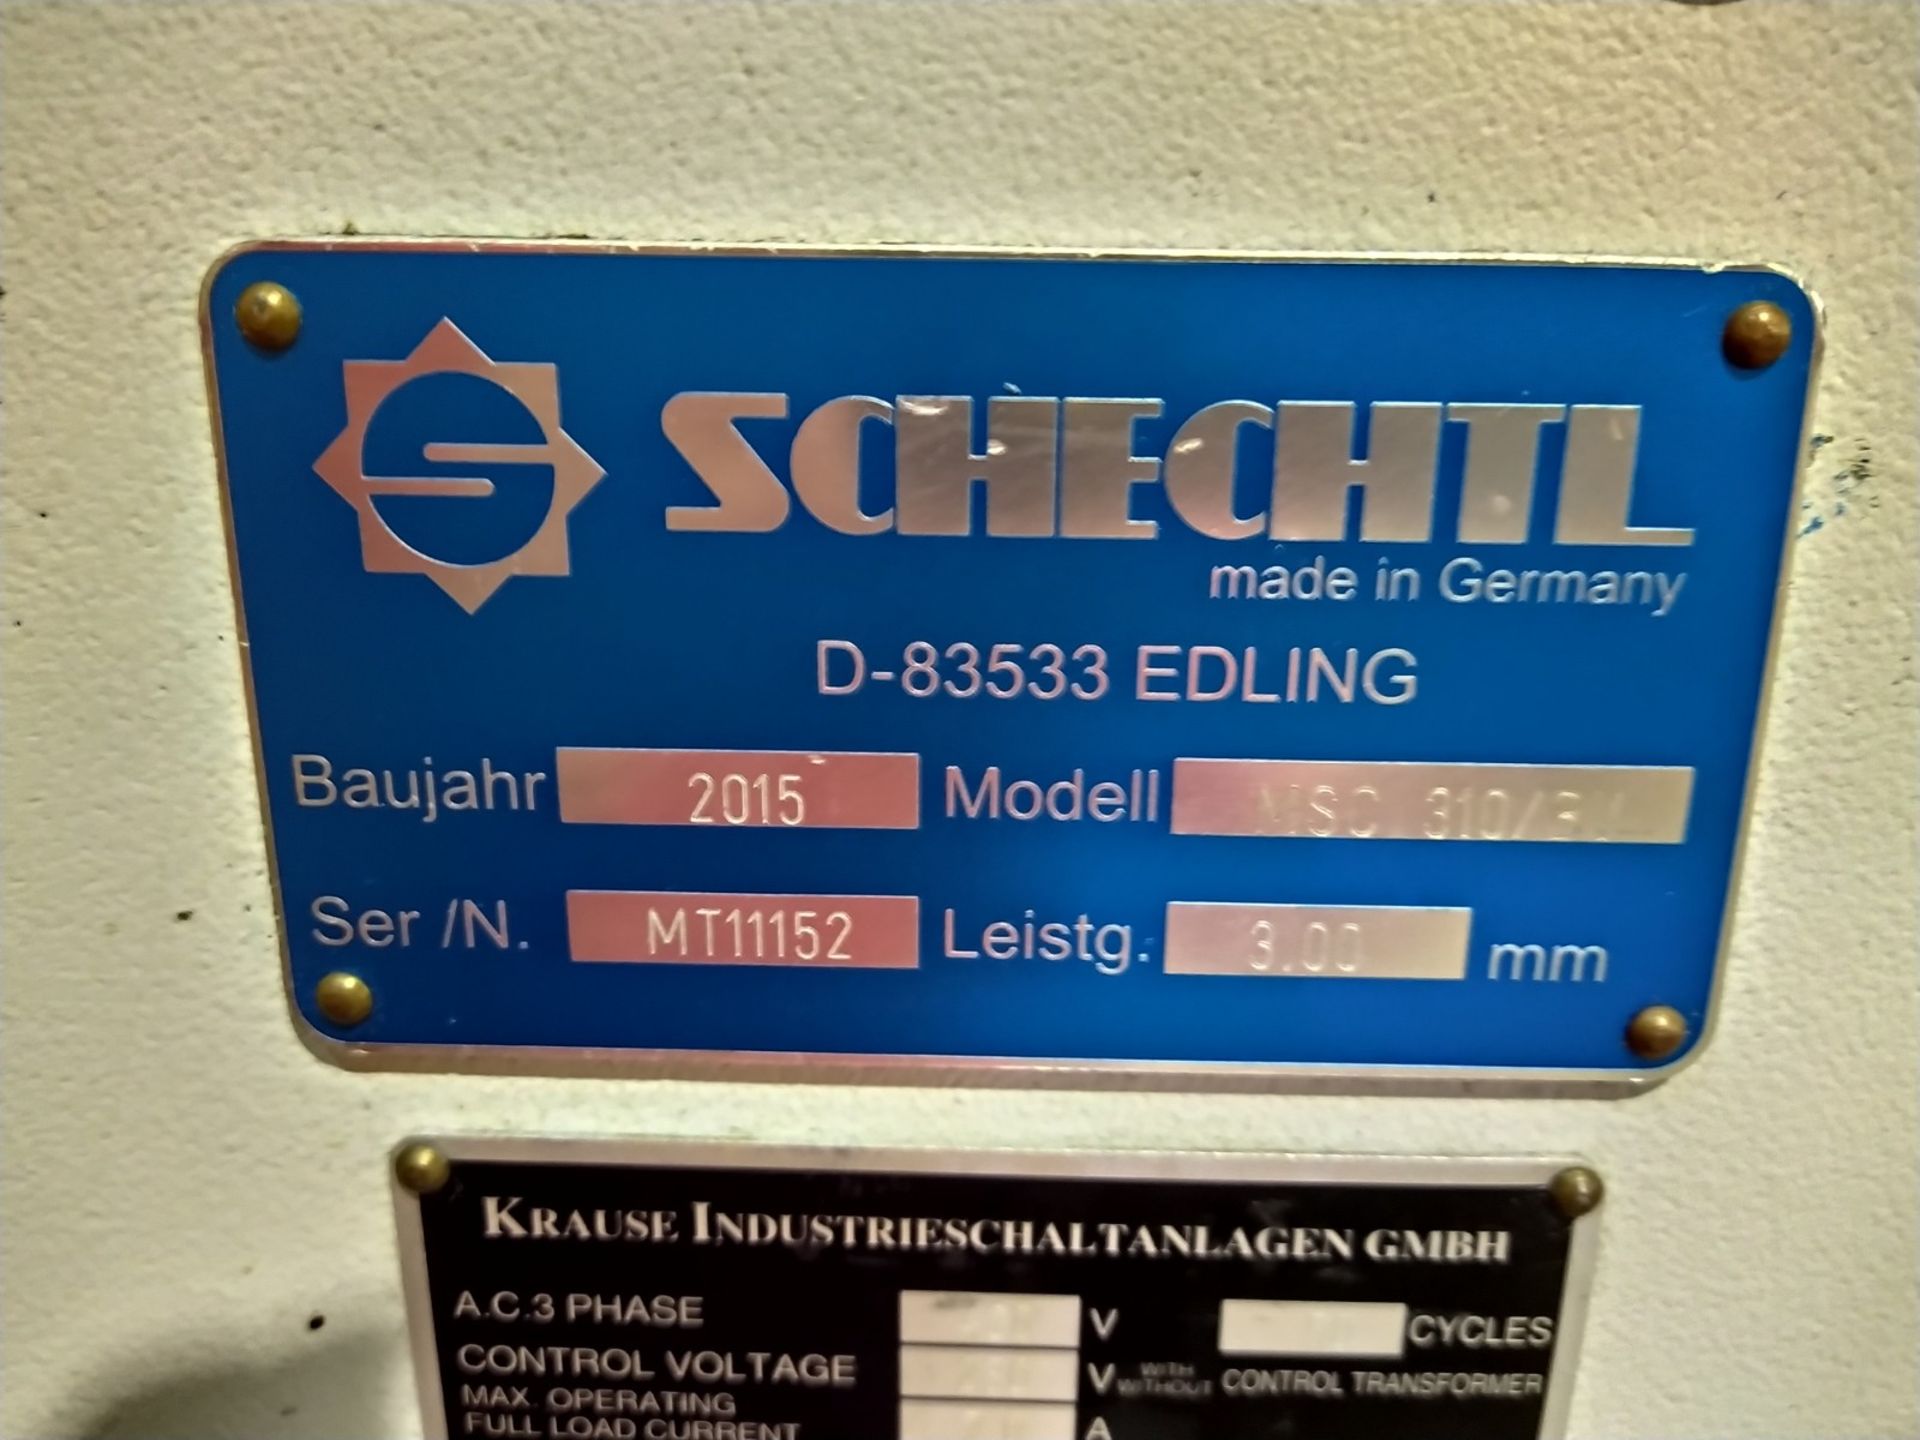 Schechtl MSC 310/BV GUILLOTINE, 3m x 3mm, serial no. MT11152, year of manufacture 2015, dimensions - Image 4 of 5